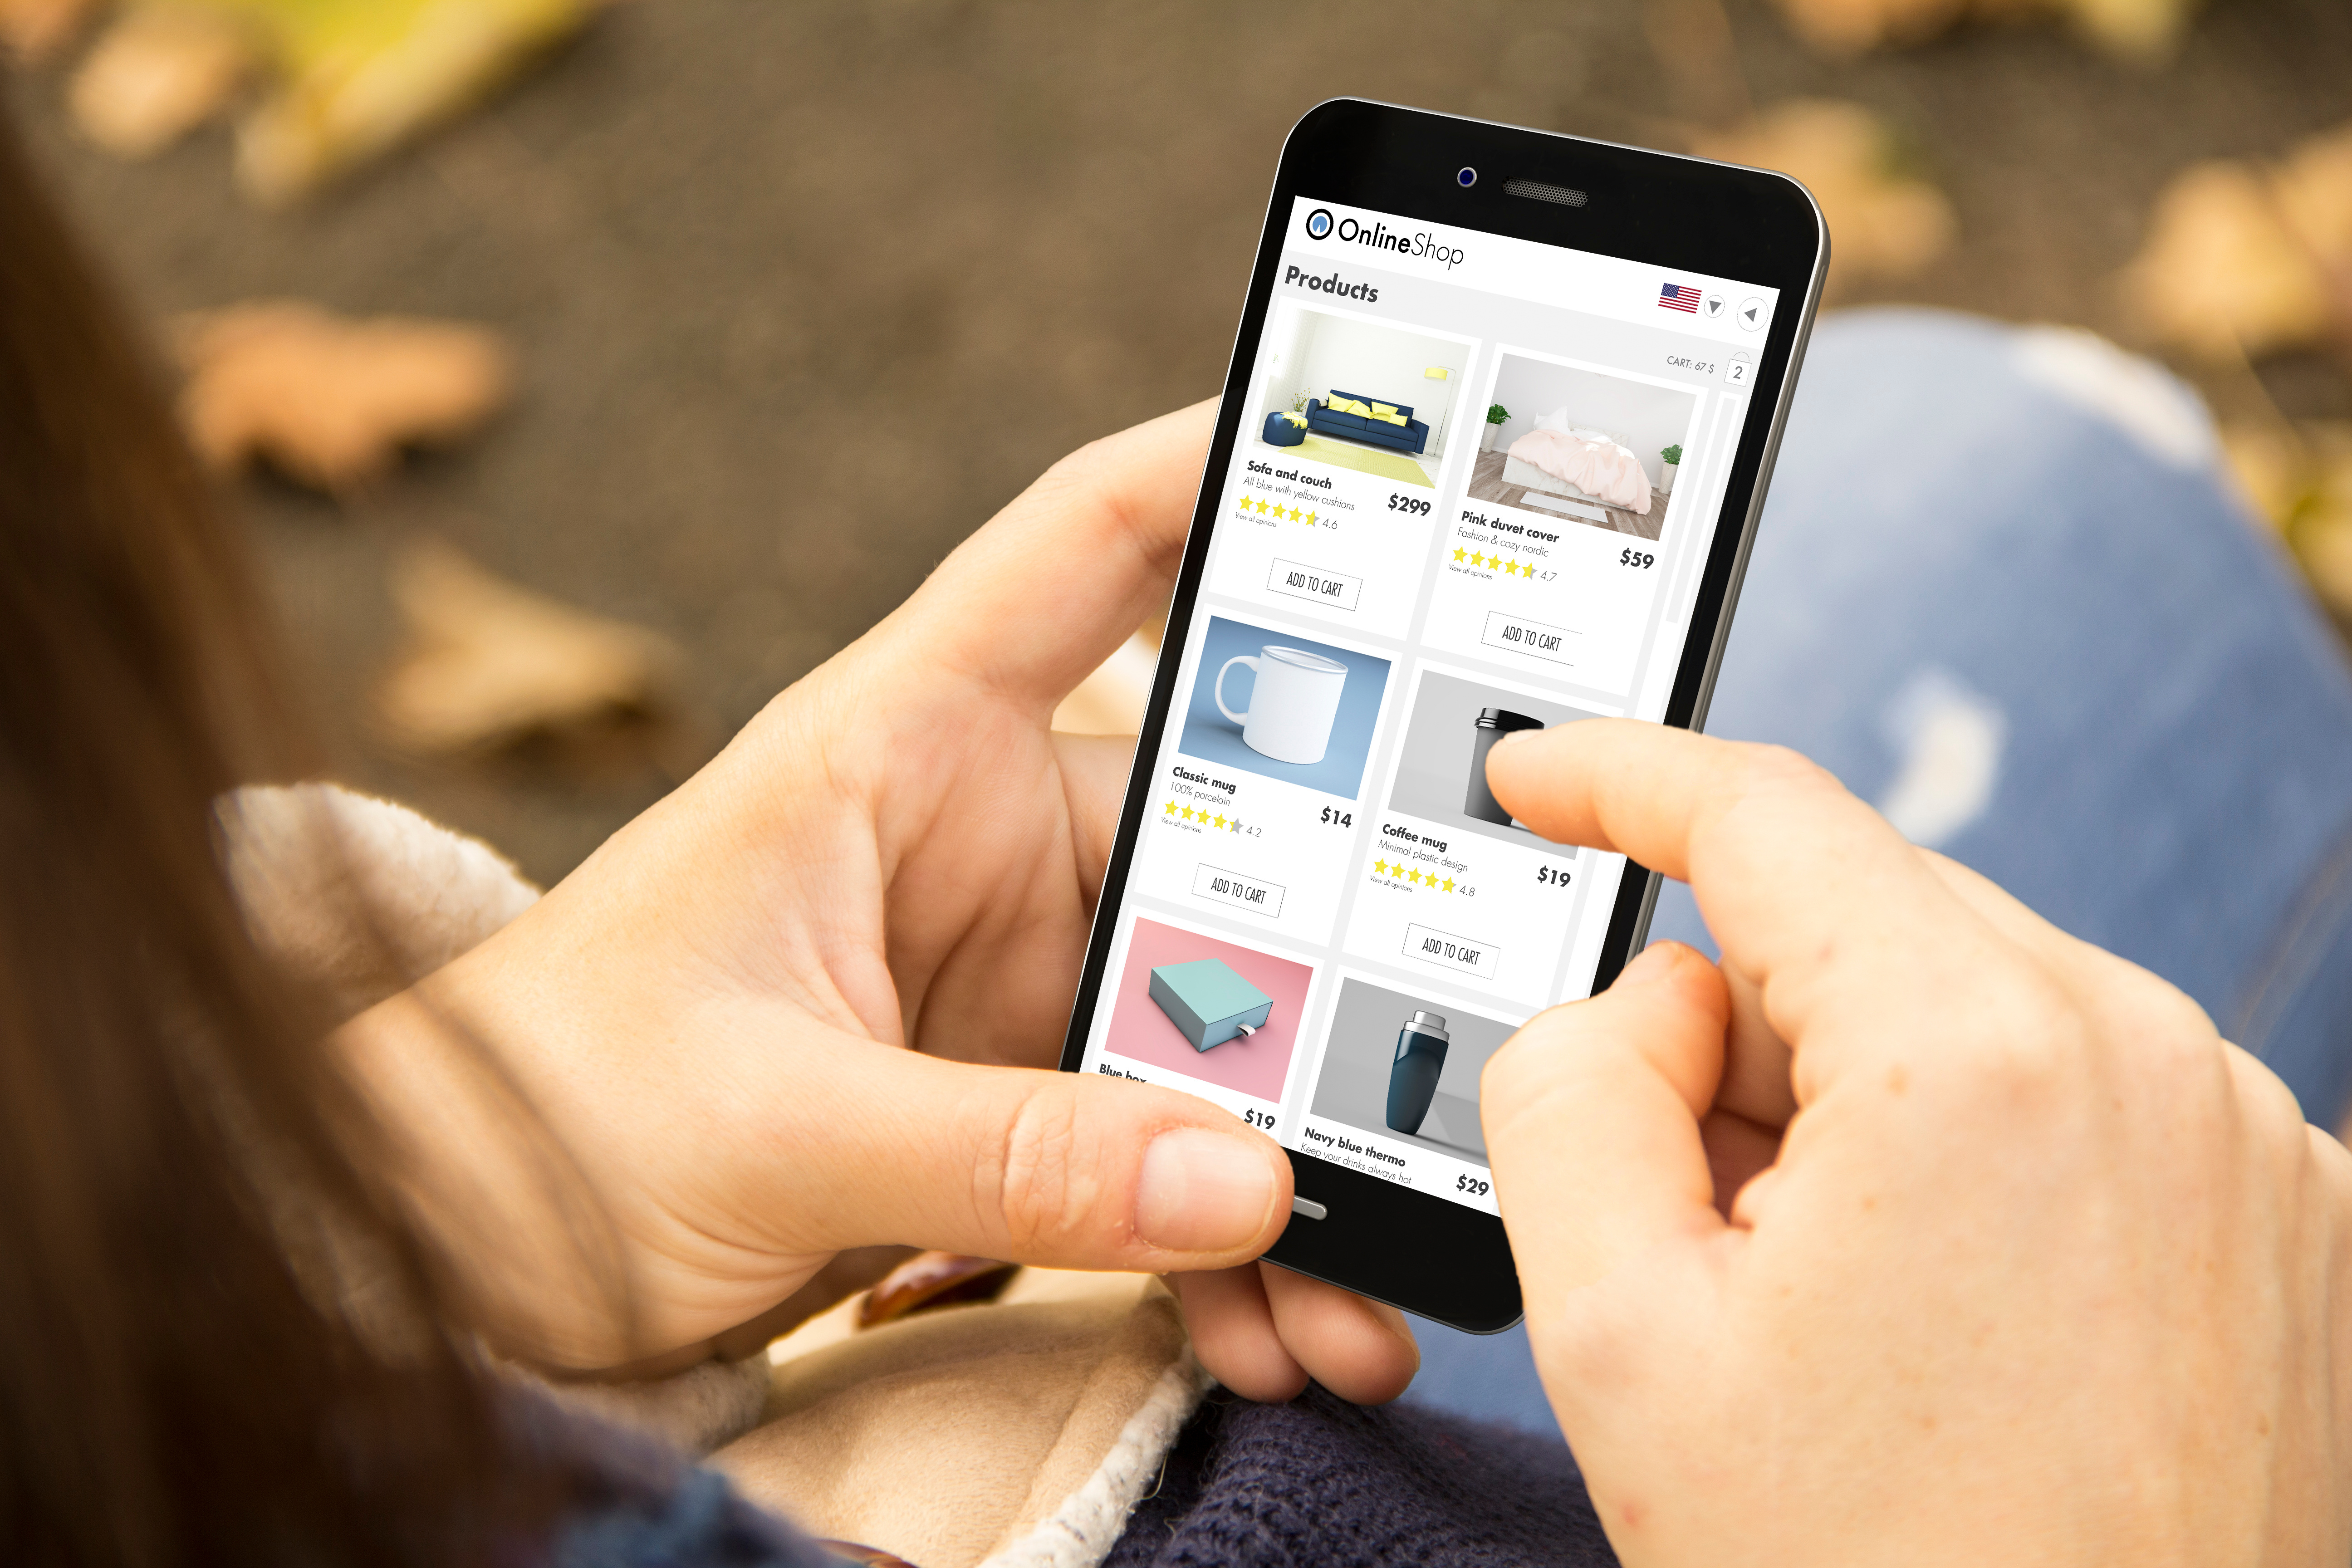 7 Mobile Commerce Stats and Trends Ecommerce Brands Should Know